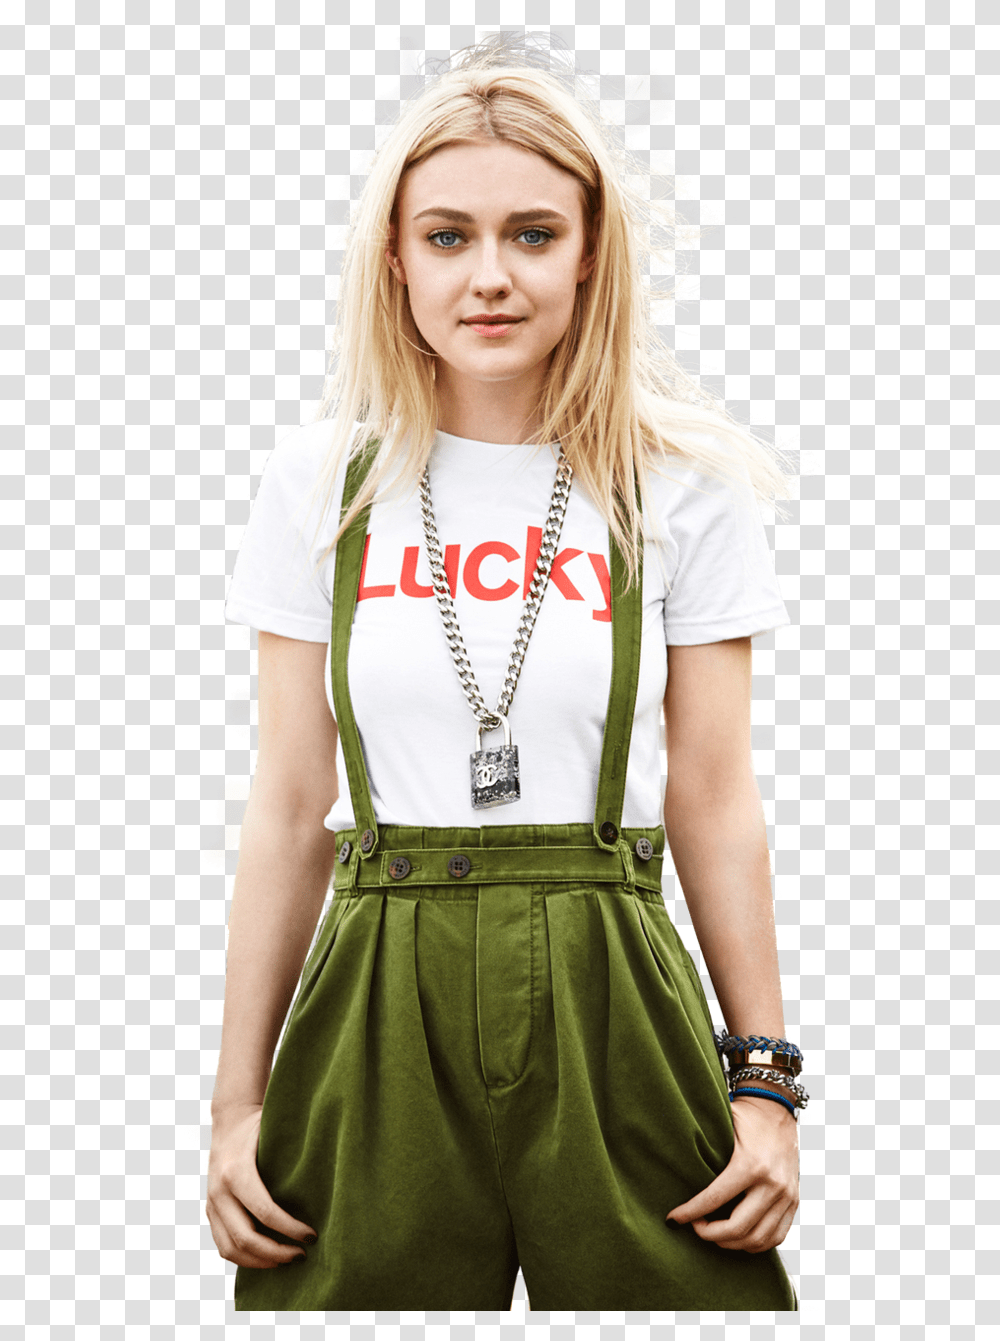 Images About Dakota Fanning On We Heart It Dakota Fanning, Necklace, Jewelry, Accessories, Accessory Transparent Png